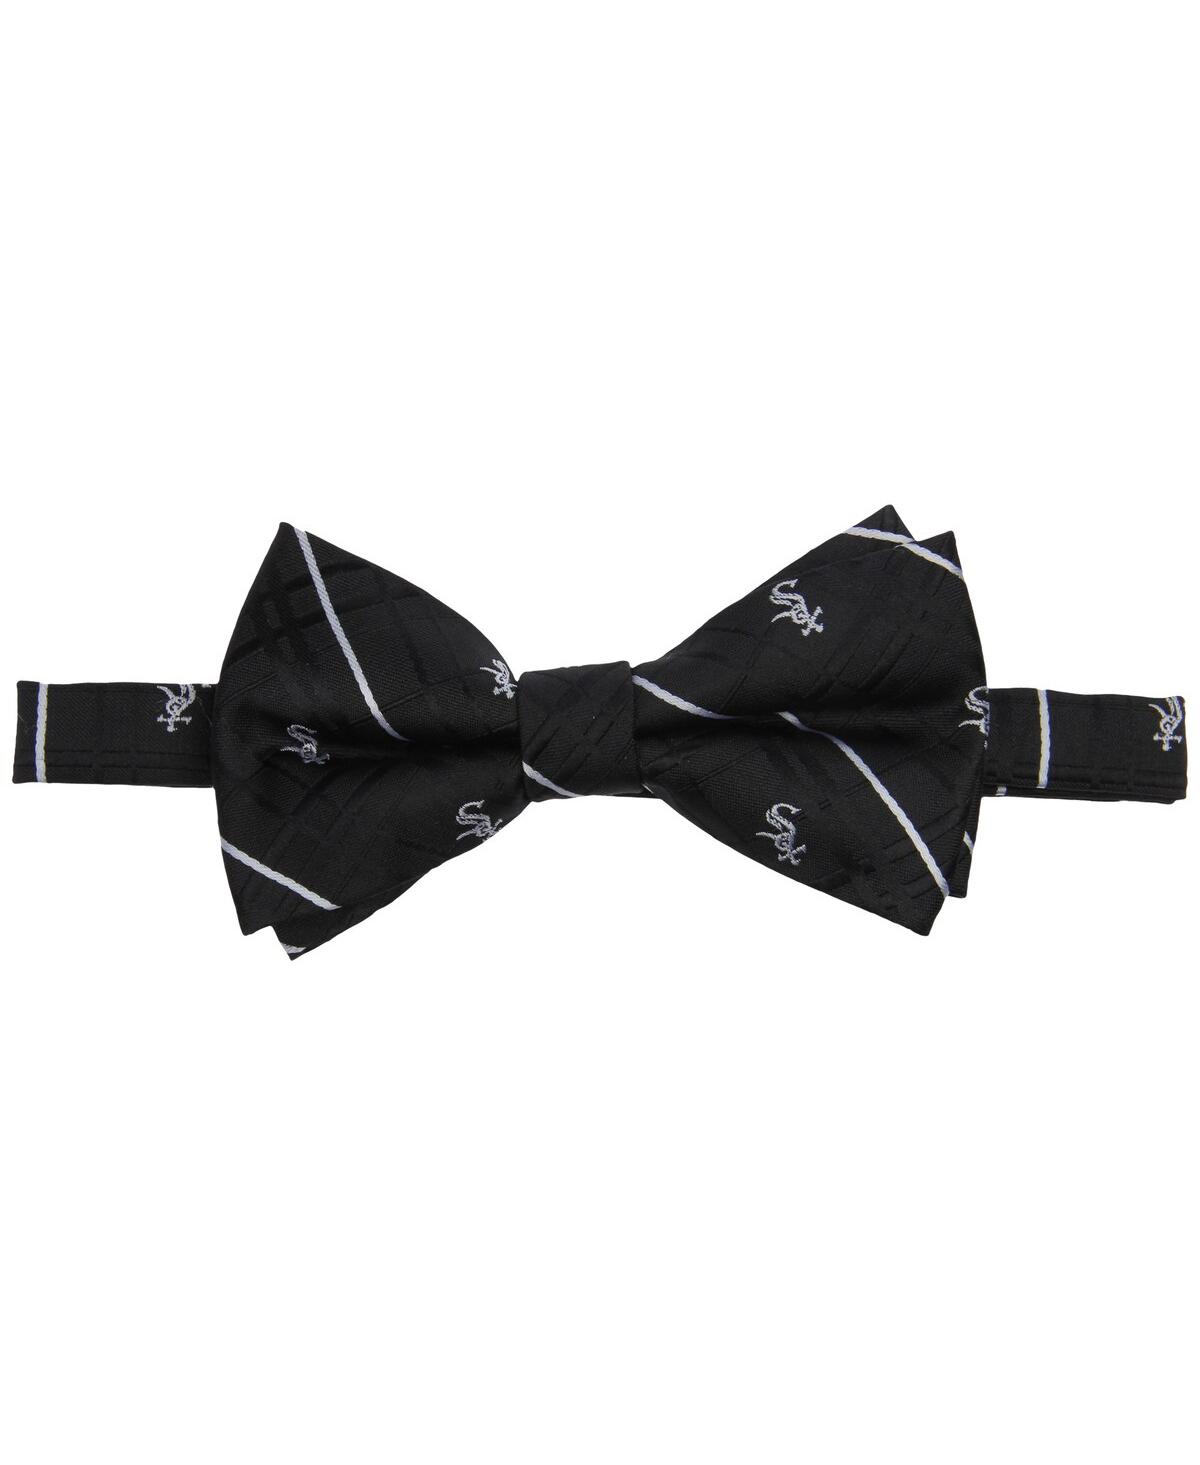 Eagles Wings Men's Black Chicago White Sox Oxford Bow Tie